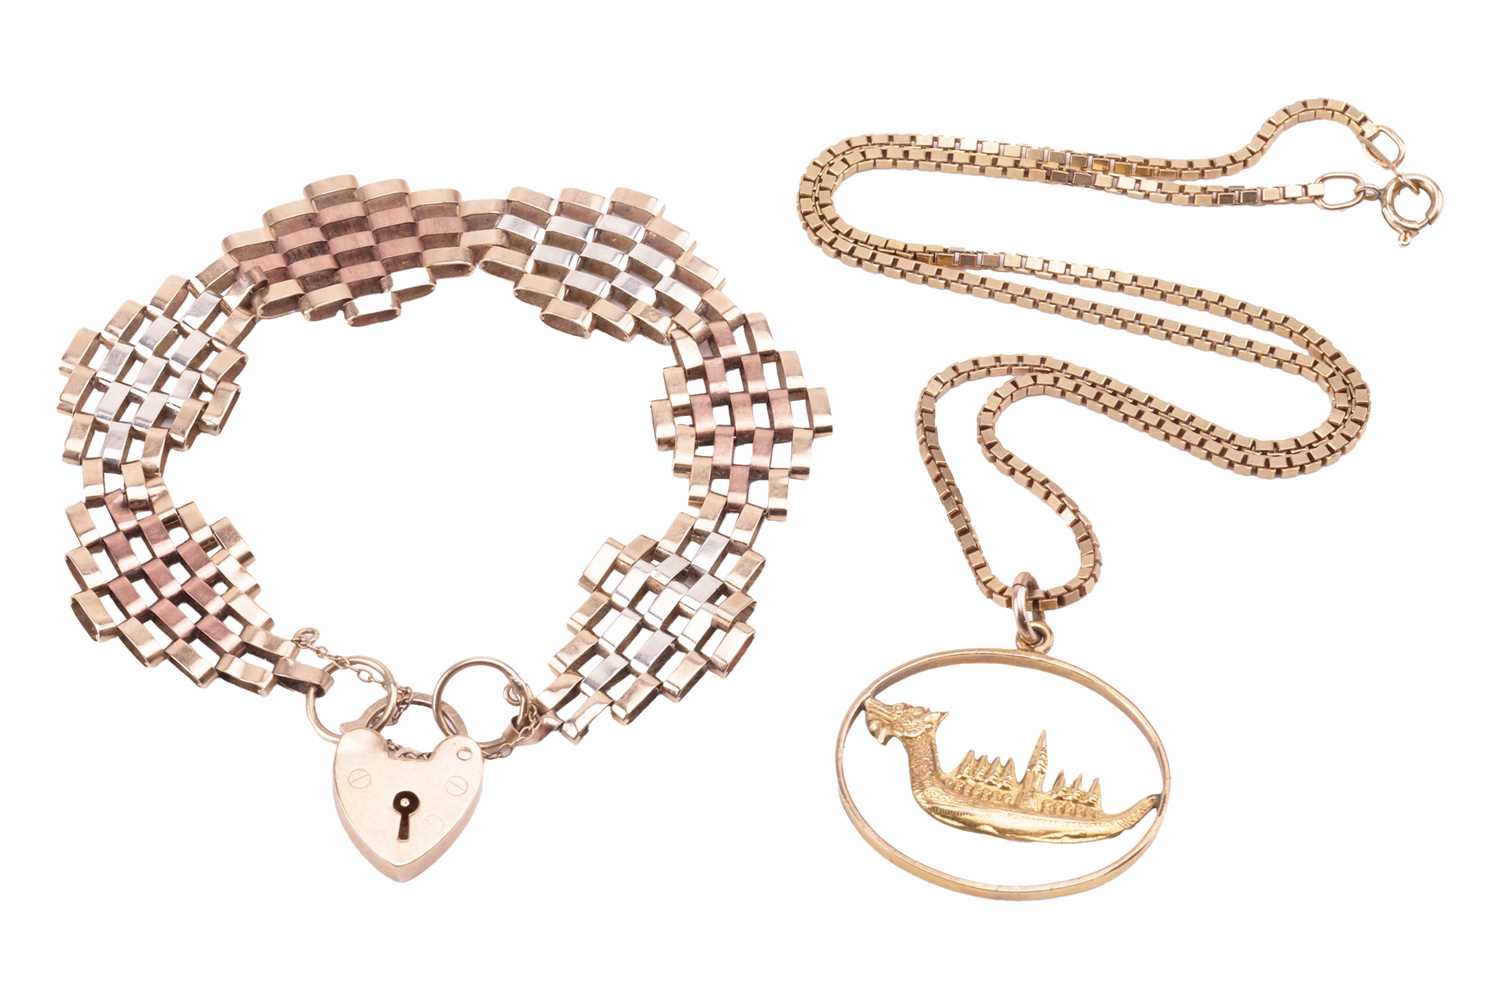 A 9ct gold gate bracelet and a pendant on chain; the bracelet constructed with three varieties of co